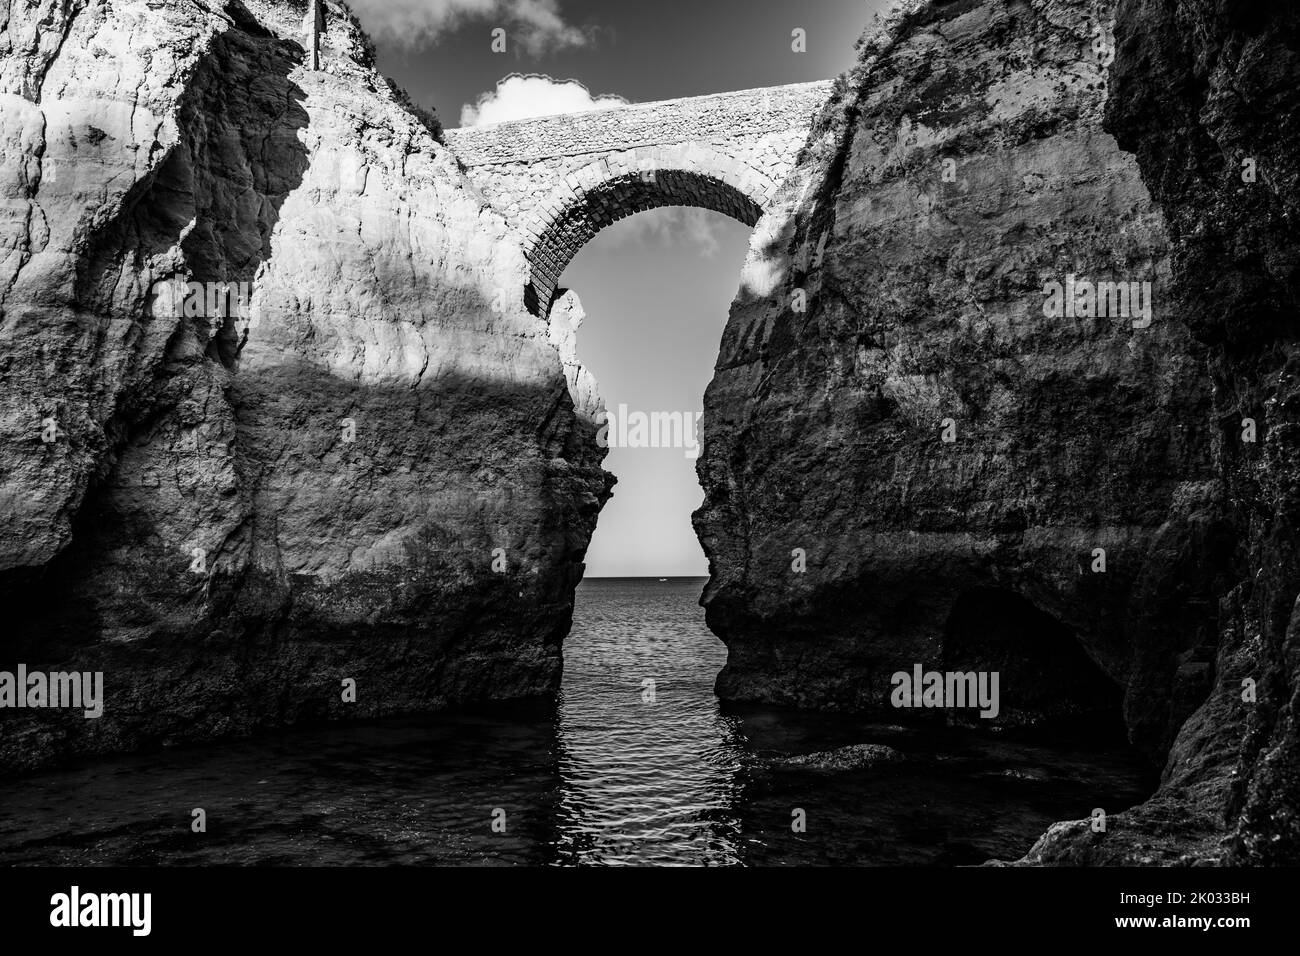 A black of white of the bridge connecting two rocks. Stock Photo